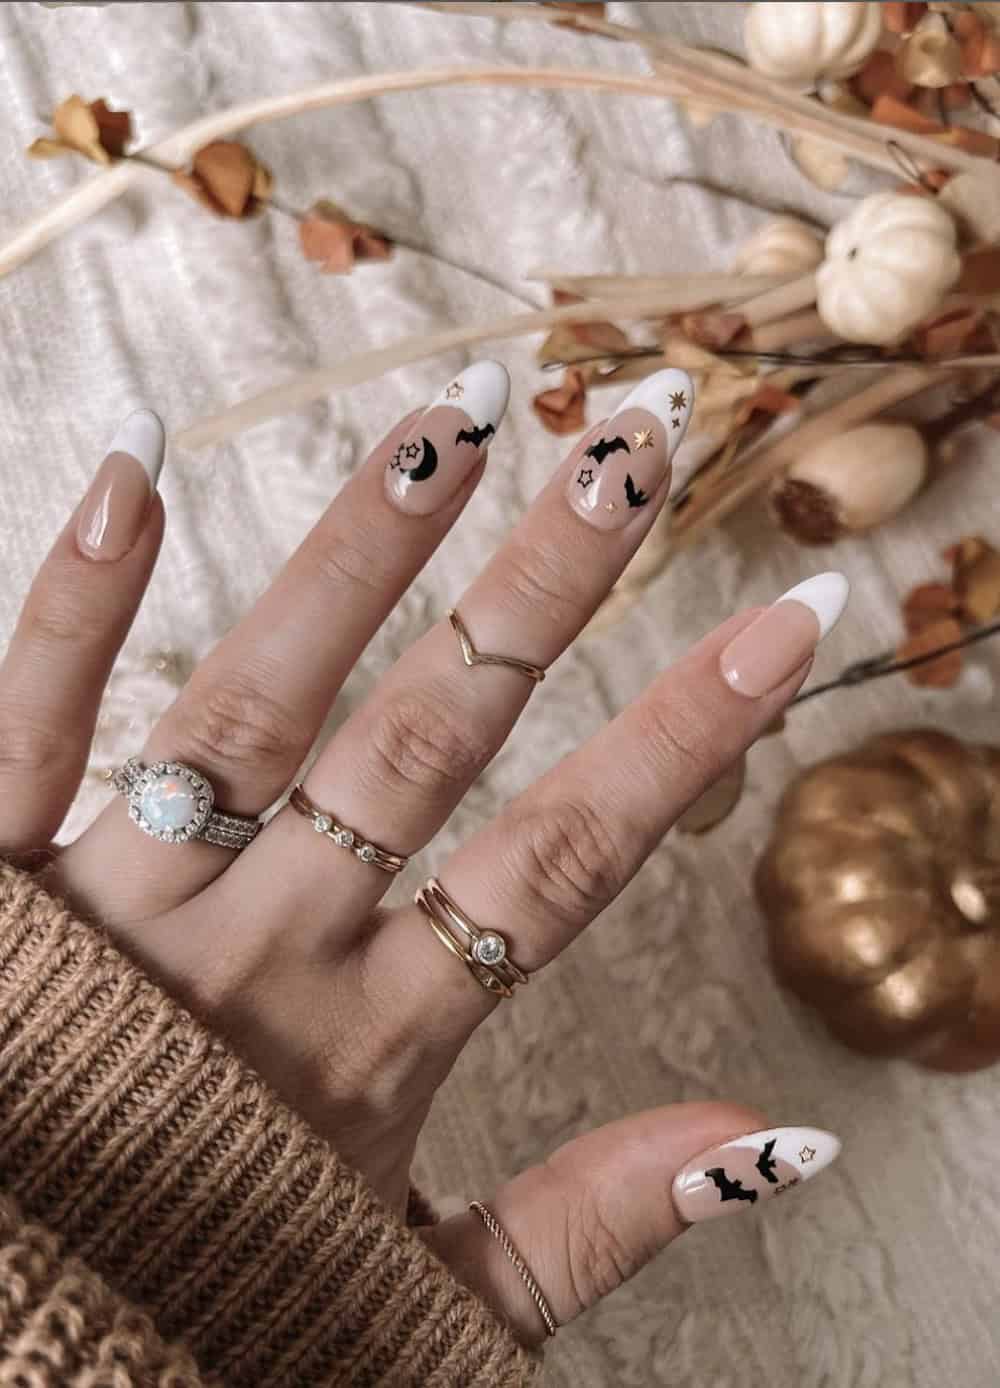 long nude almond nails with white tips, gold star details, and black bats and moons